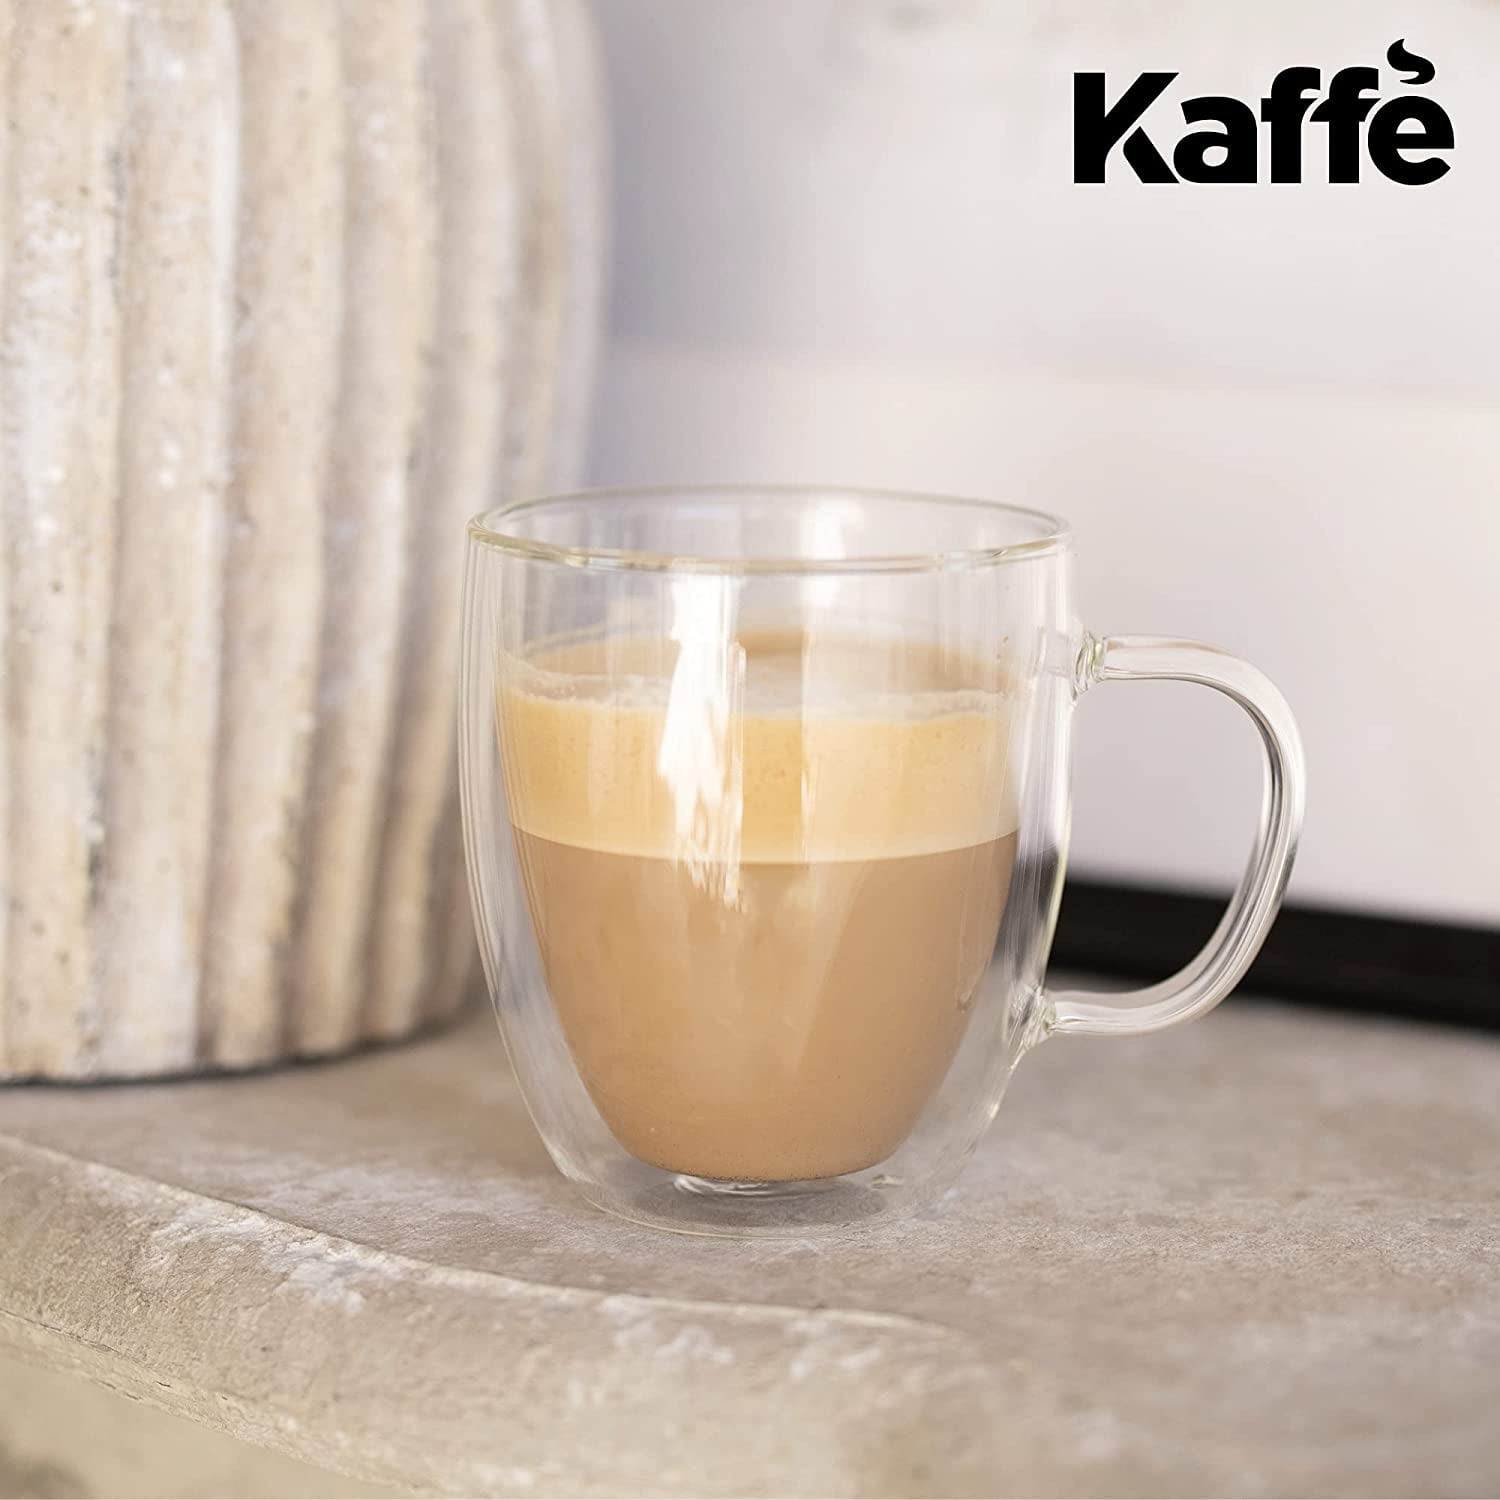 Kaffe 16oz Large Glass Cups - Double-Wall Clear Coffee Mug Set - Insulated Glass Cups for Latte, Espresso, Cappuccino, (Set of 2) Walmart.com